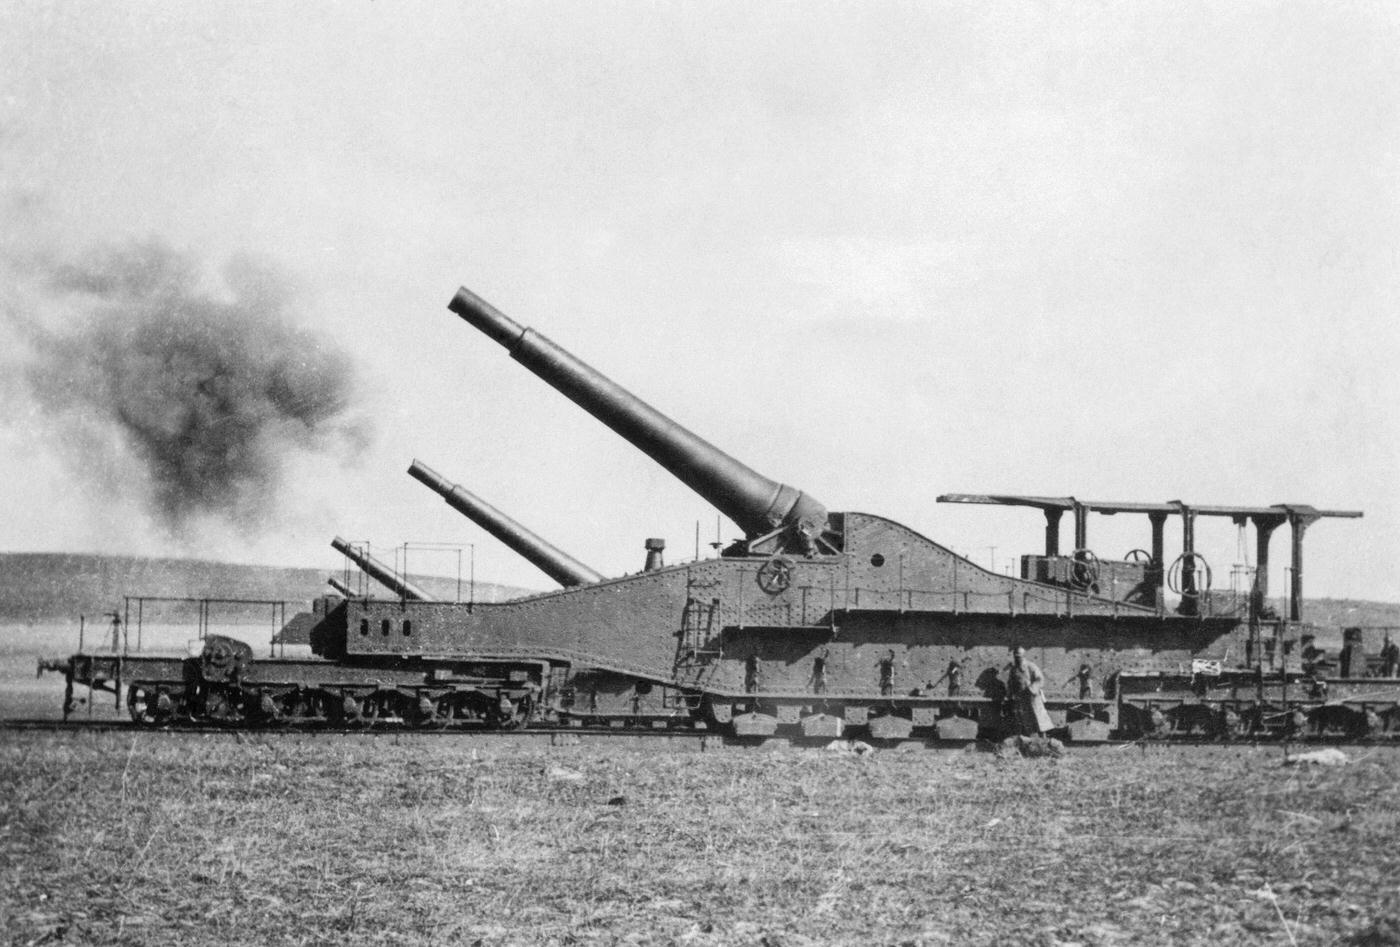 Battery of 320mm cannons firing during the offensive in the region of Reims, France, April 1917.